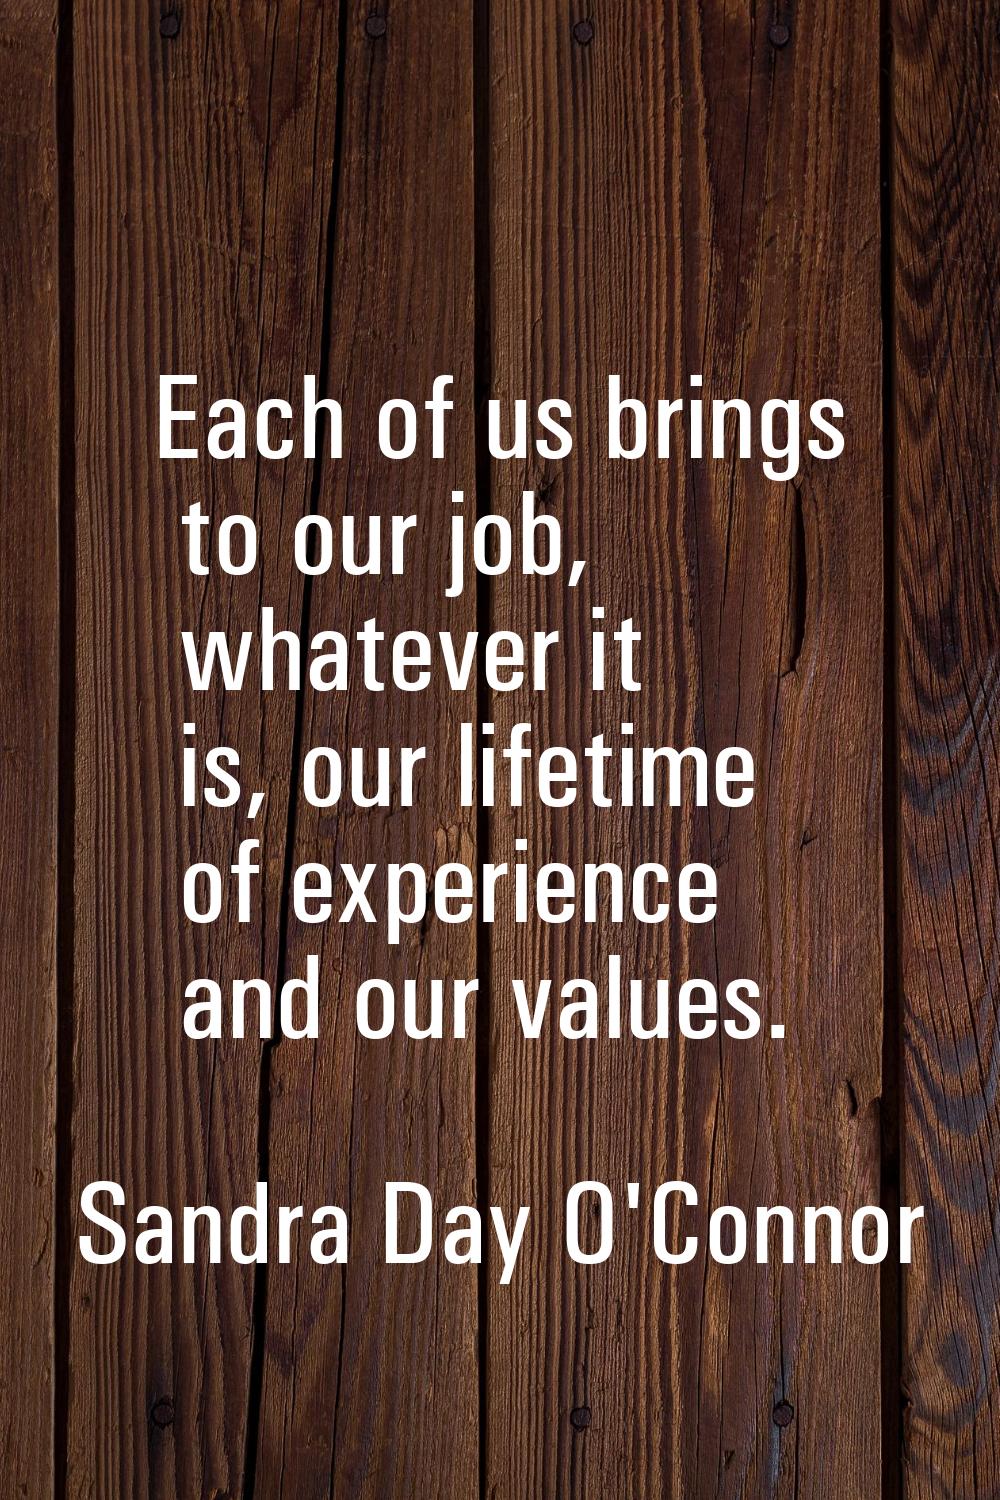 Each of us brings to our job, whatever it is, our lifetime of experience and our values.